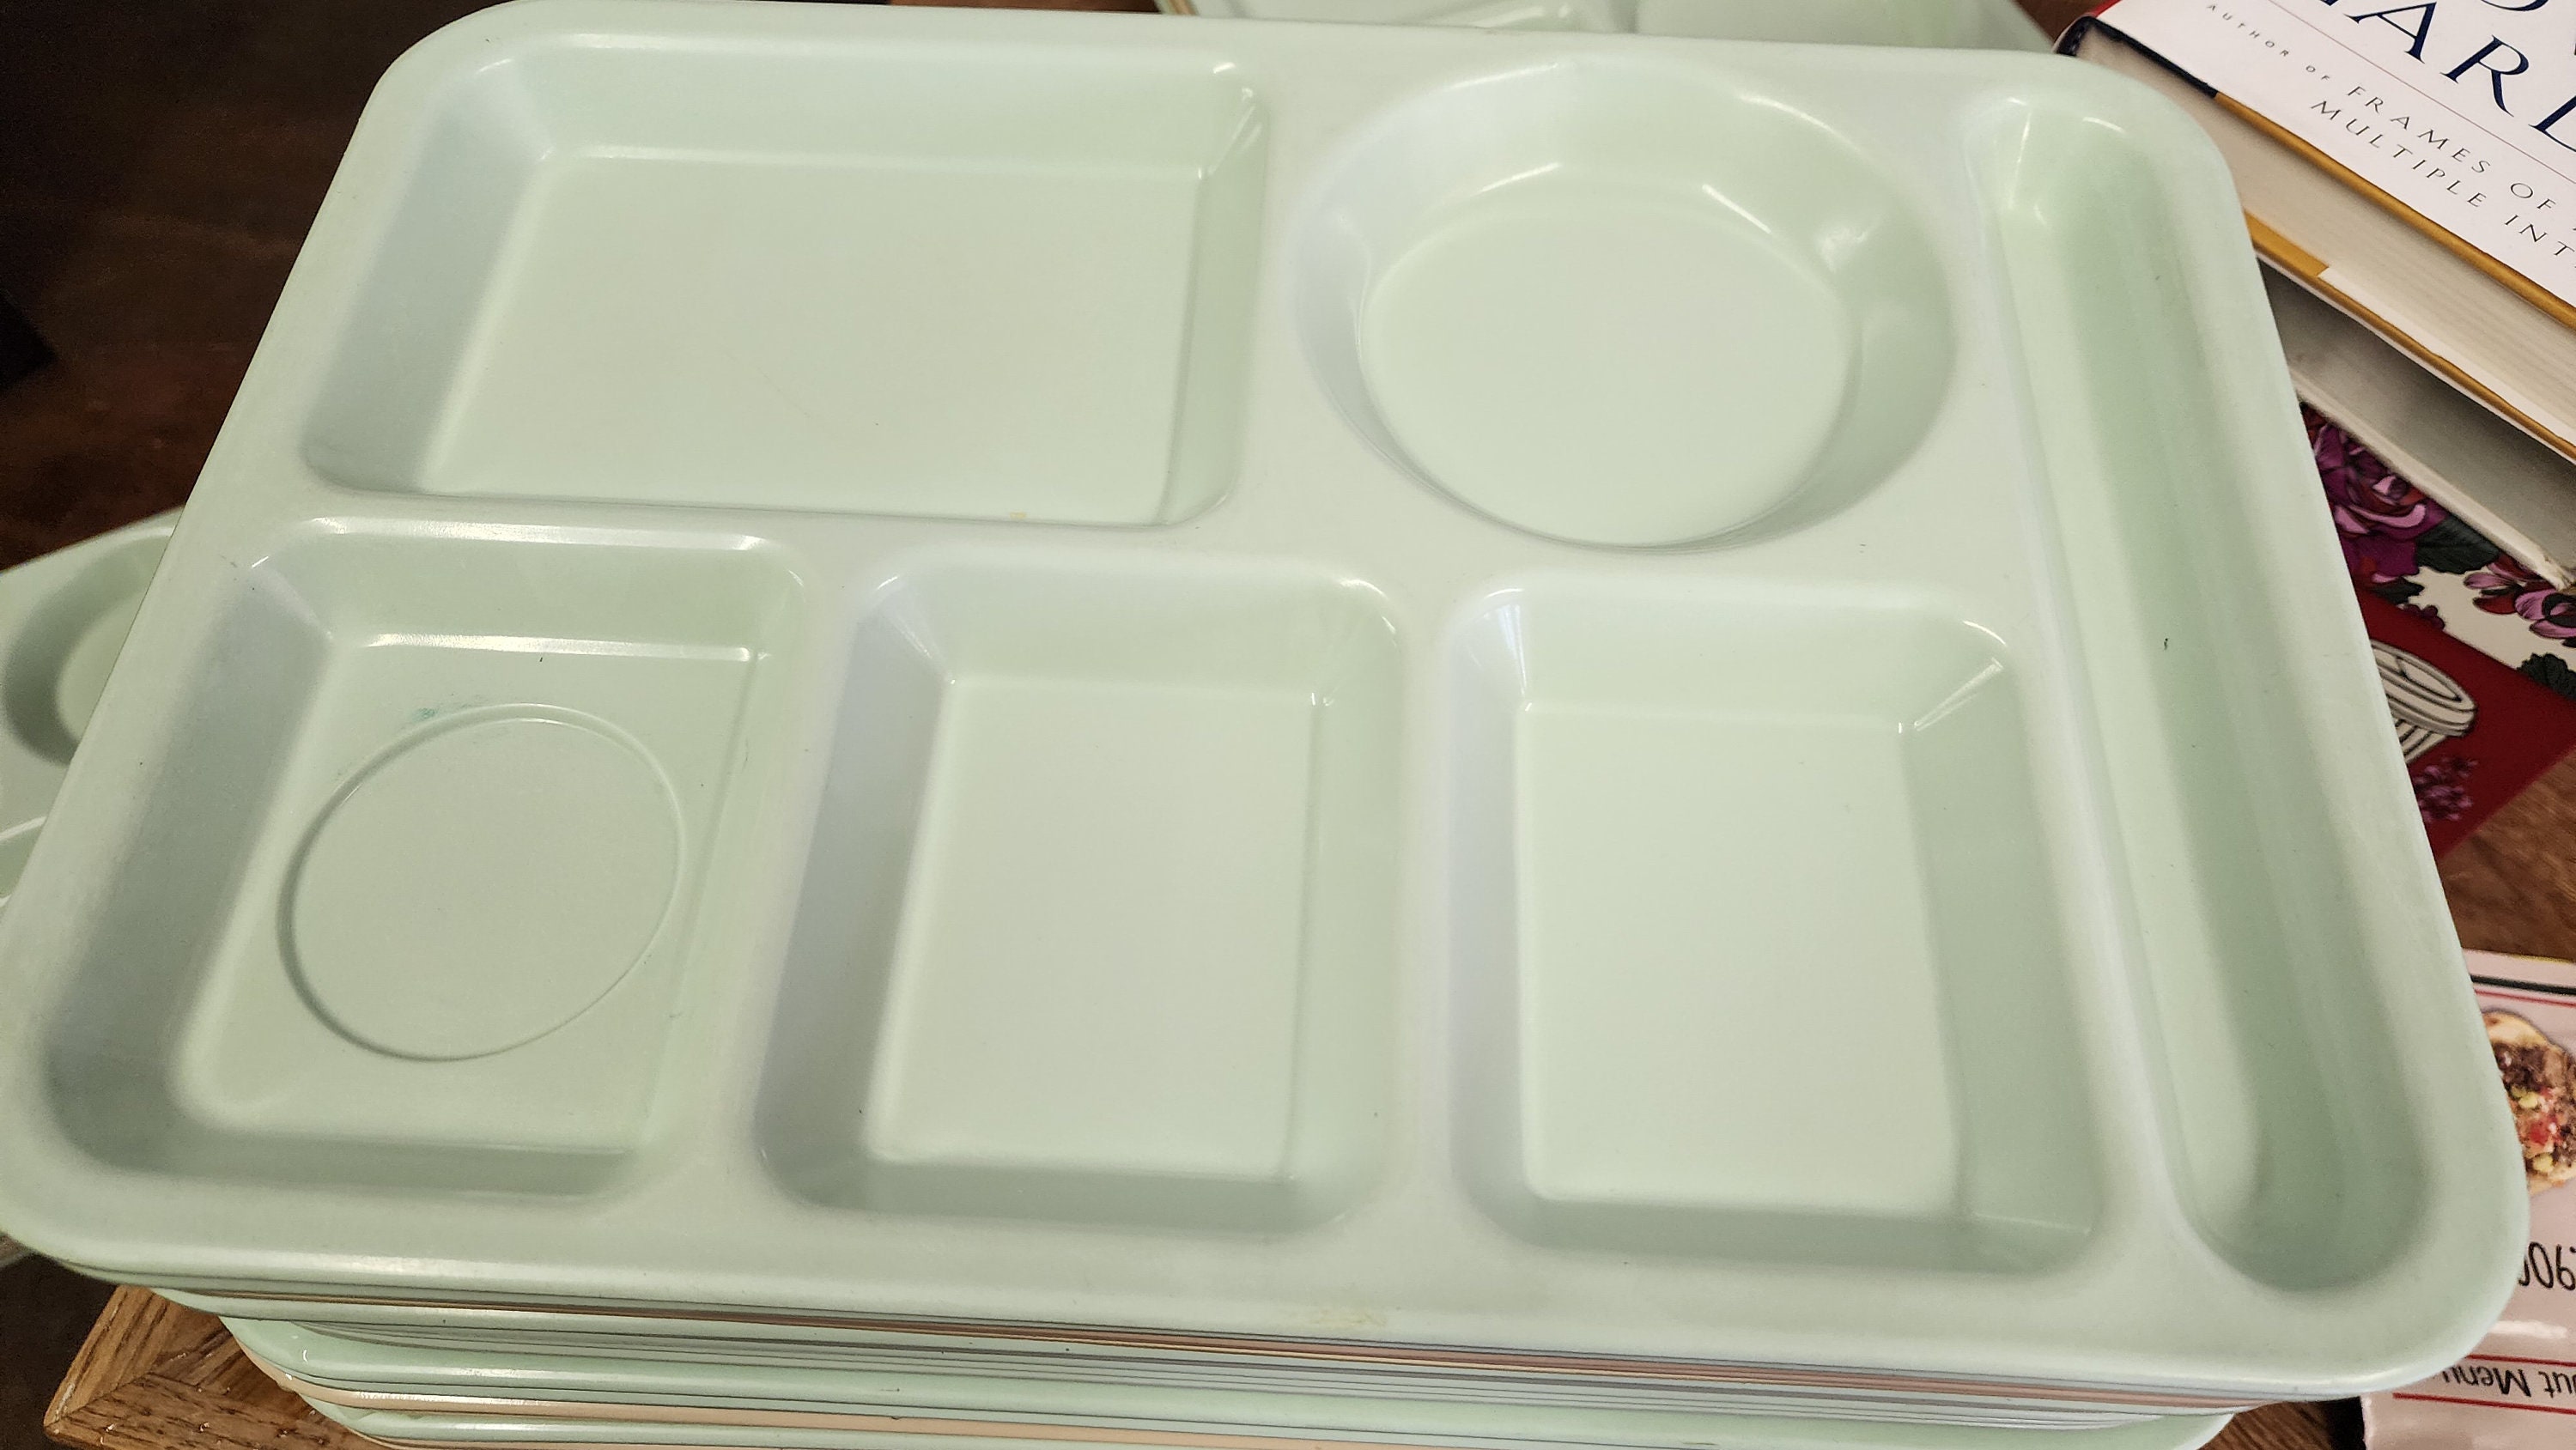 Mairbeon Plastic Serving Fast Food Trays Food-grade Cafeteria Food Trays  Rectangular Lunch Serving Trays,M,Light Blue